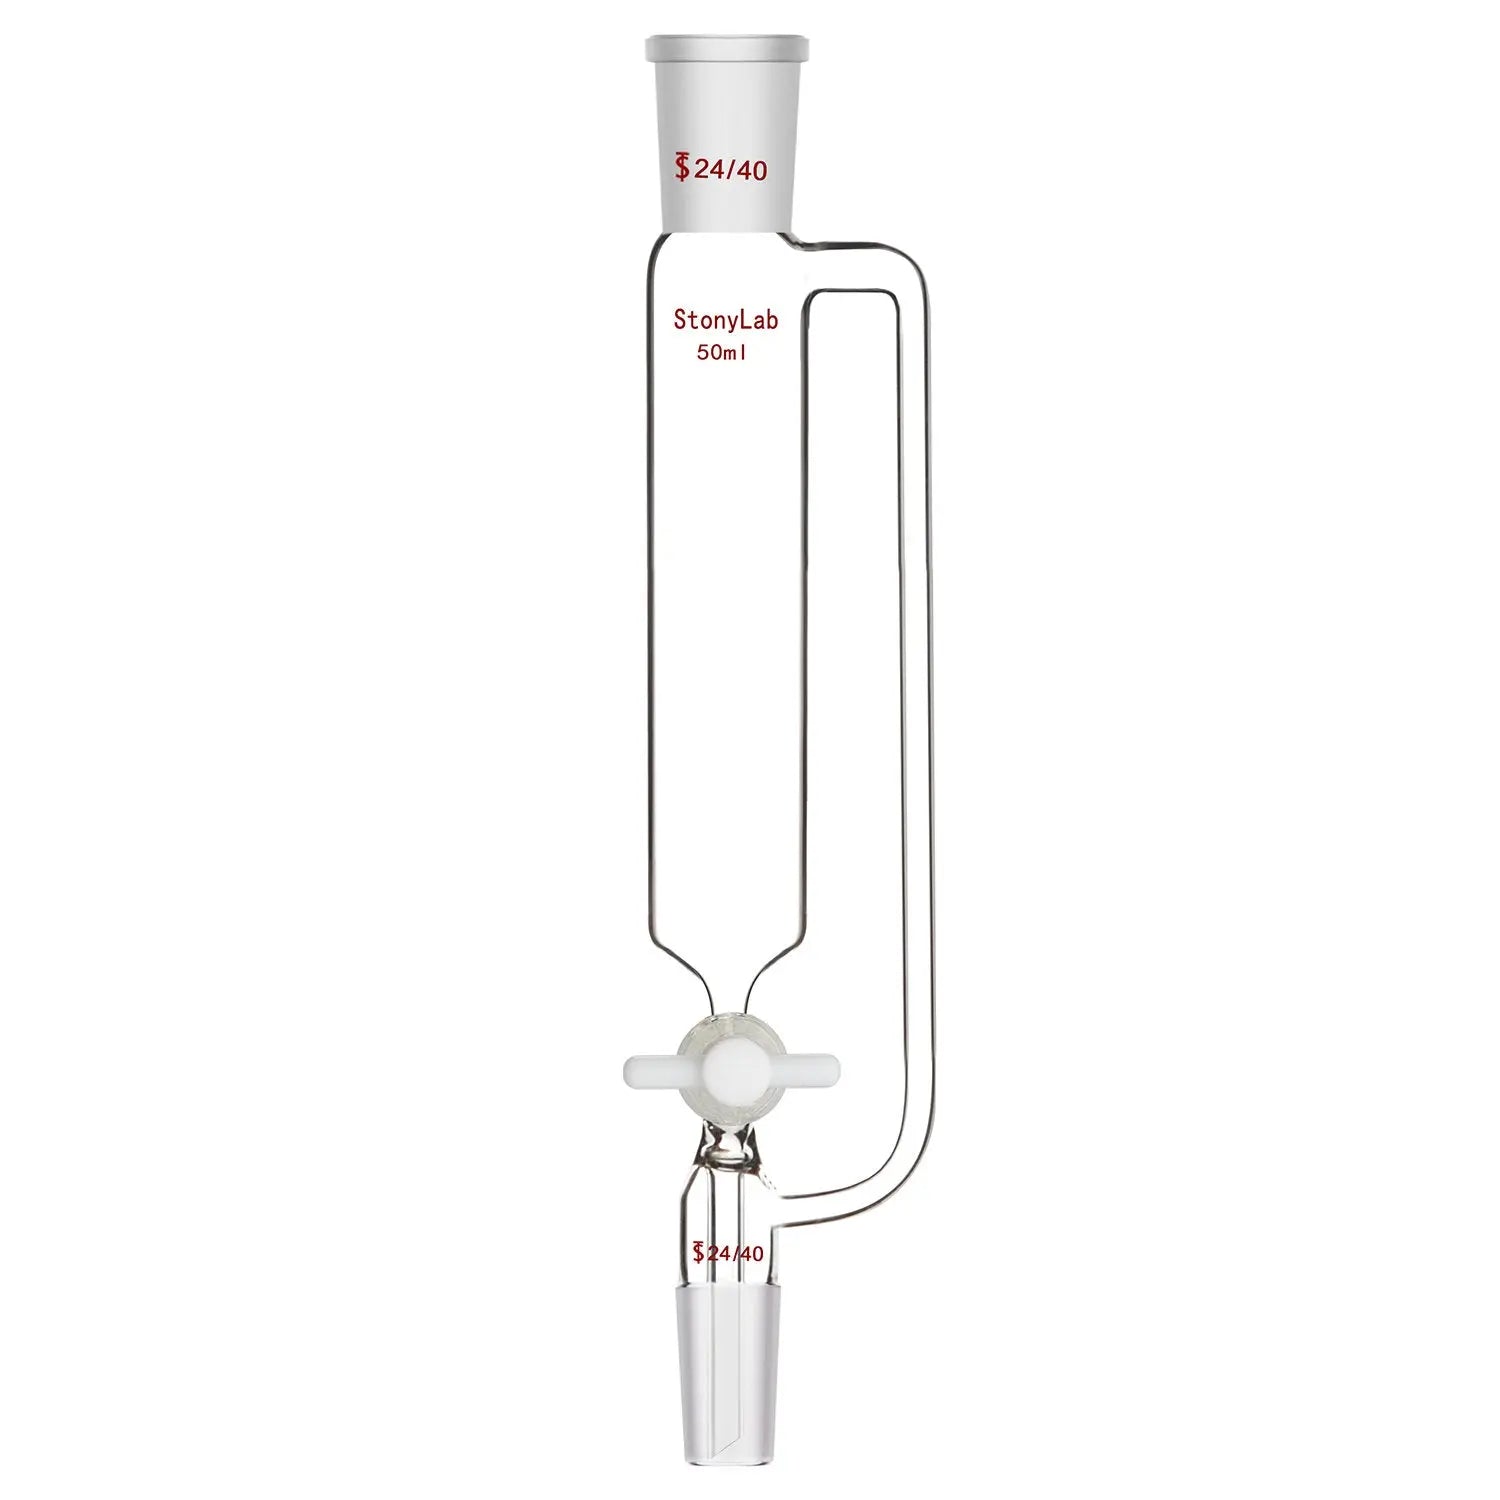 Pressure Equalizing Addition Funnel, 24/40, PTFE Stopcock, 50-500 ml - StonyLab Funnels - Glass/Powder/Weighing/Equalizing 50-ml